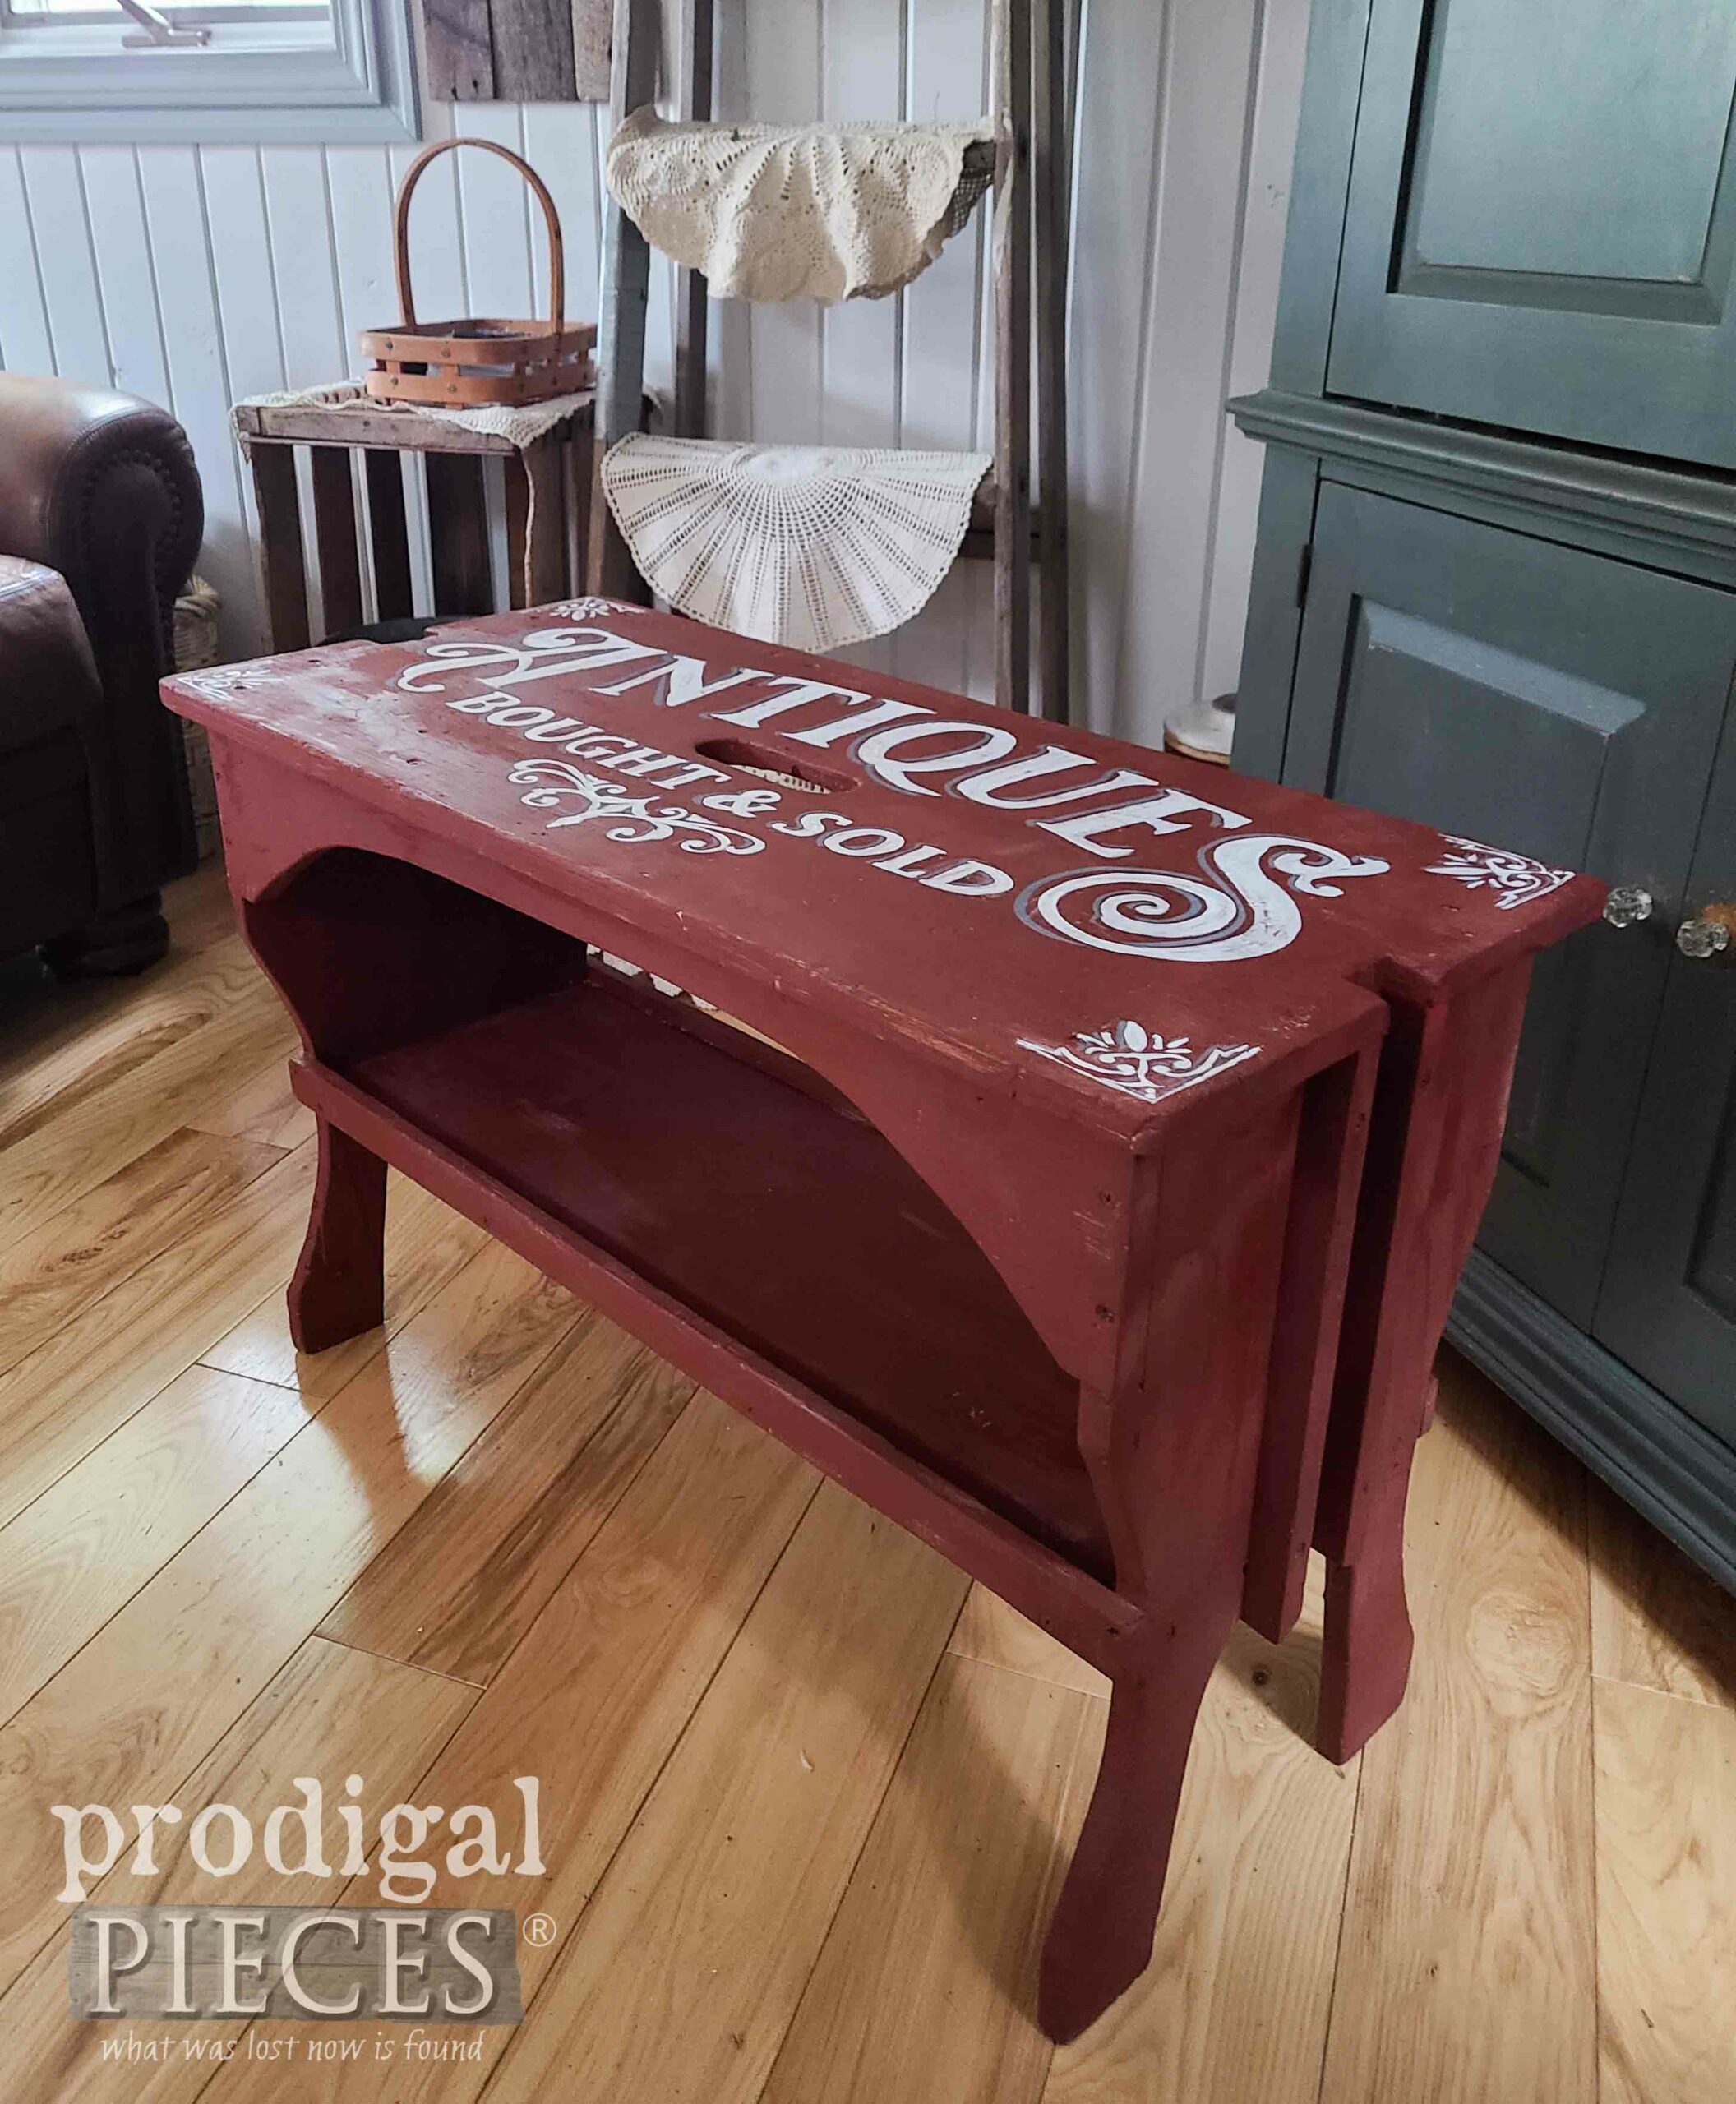 Vintage Red Bench with Typography by Laissa of Prodigal Pieces | prodigalpieces.com #prodigalpieces